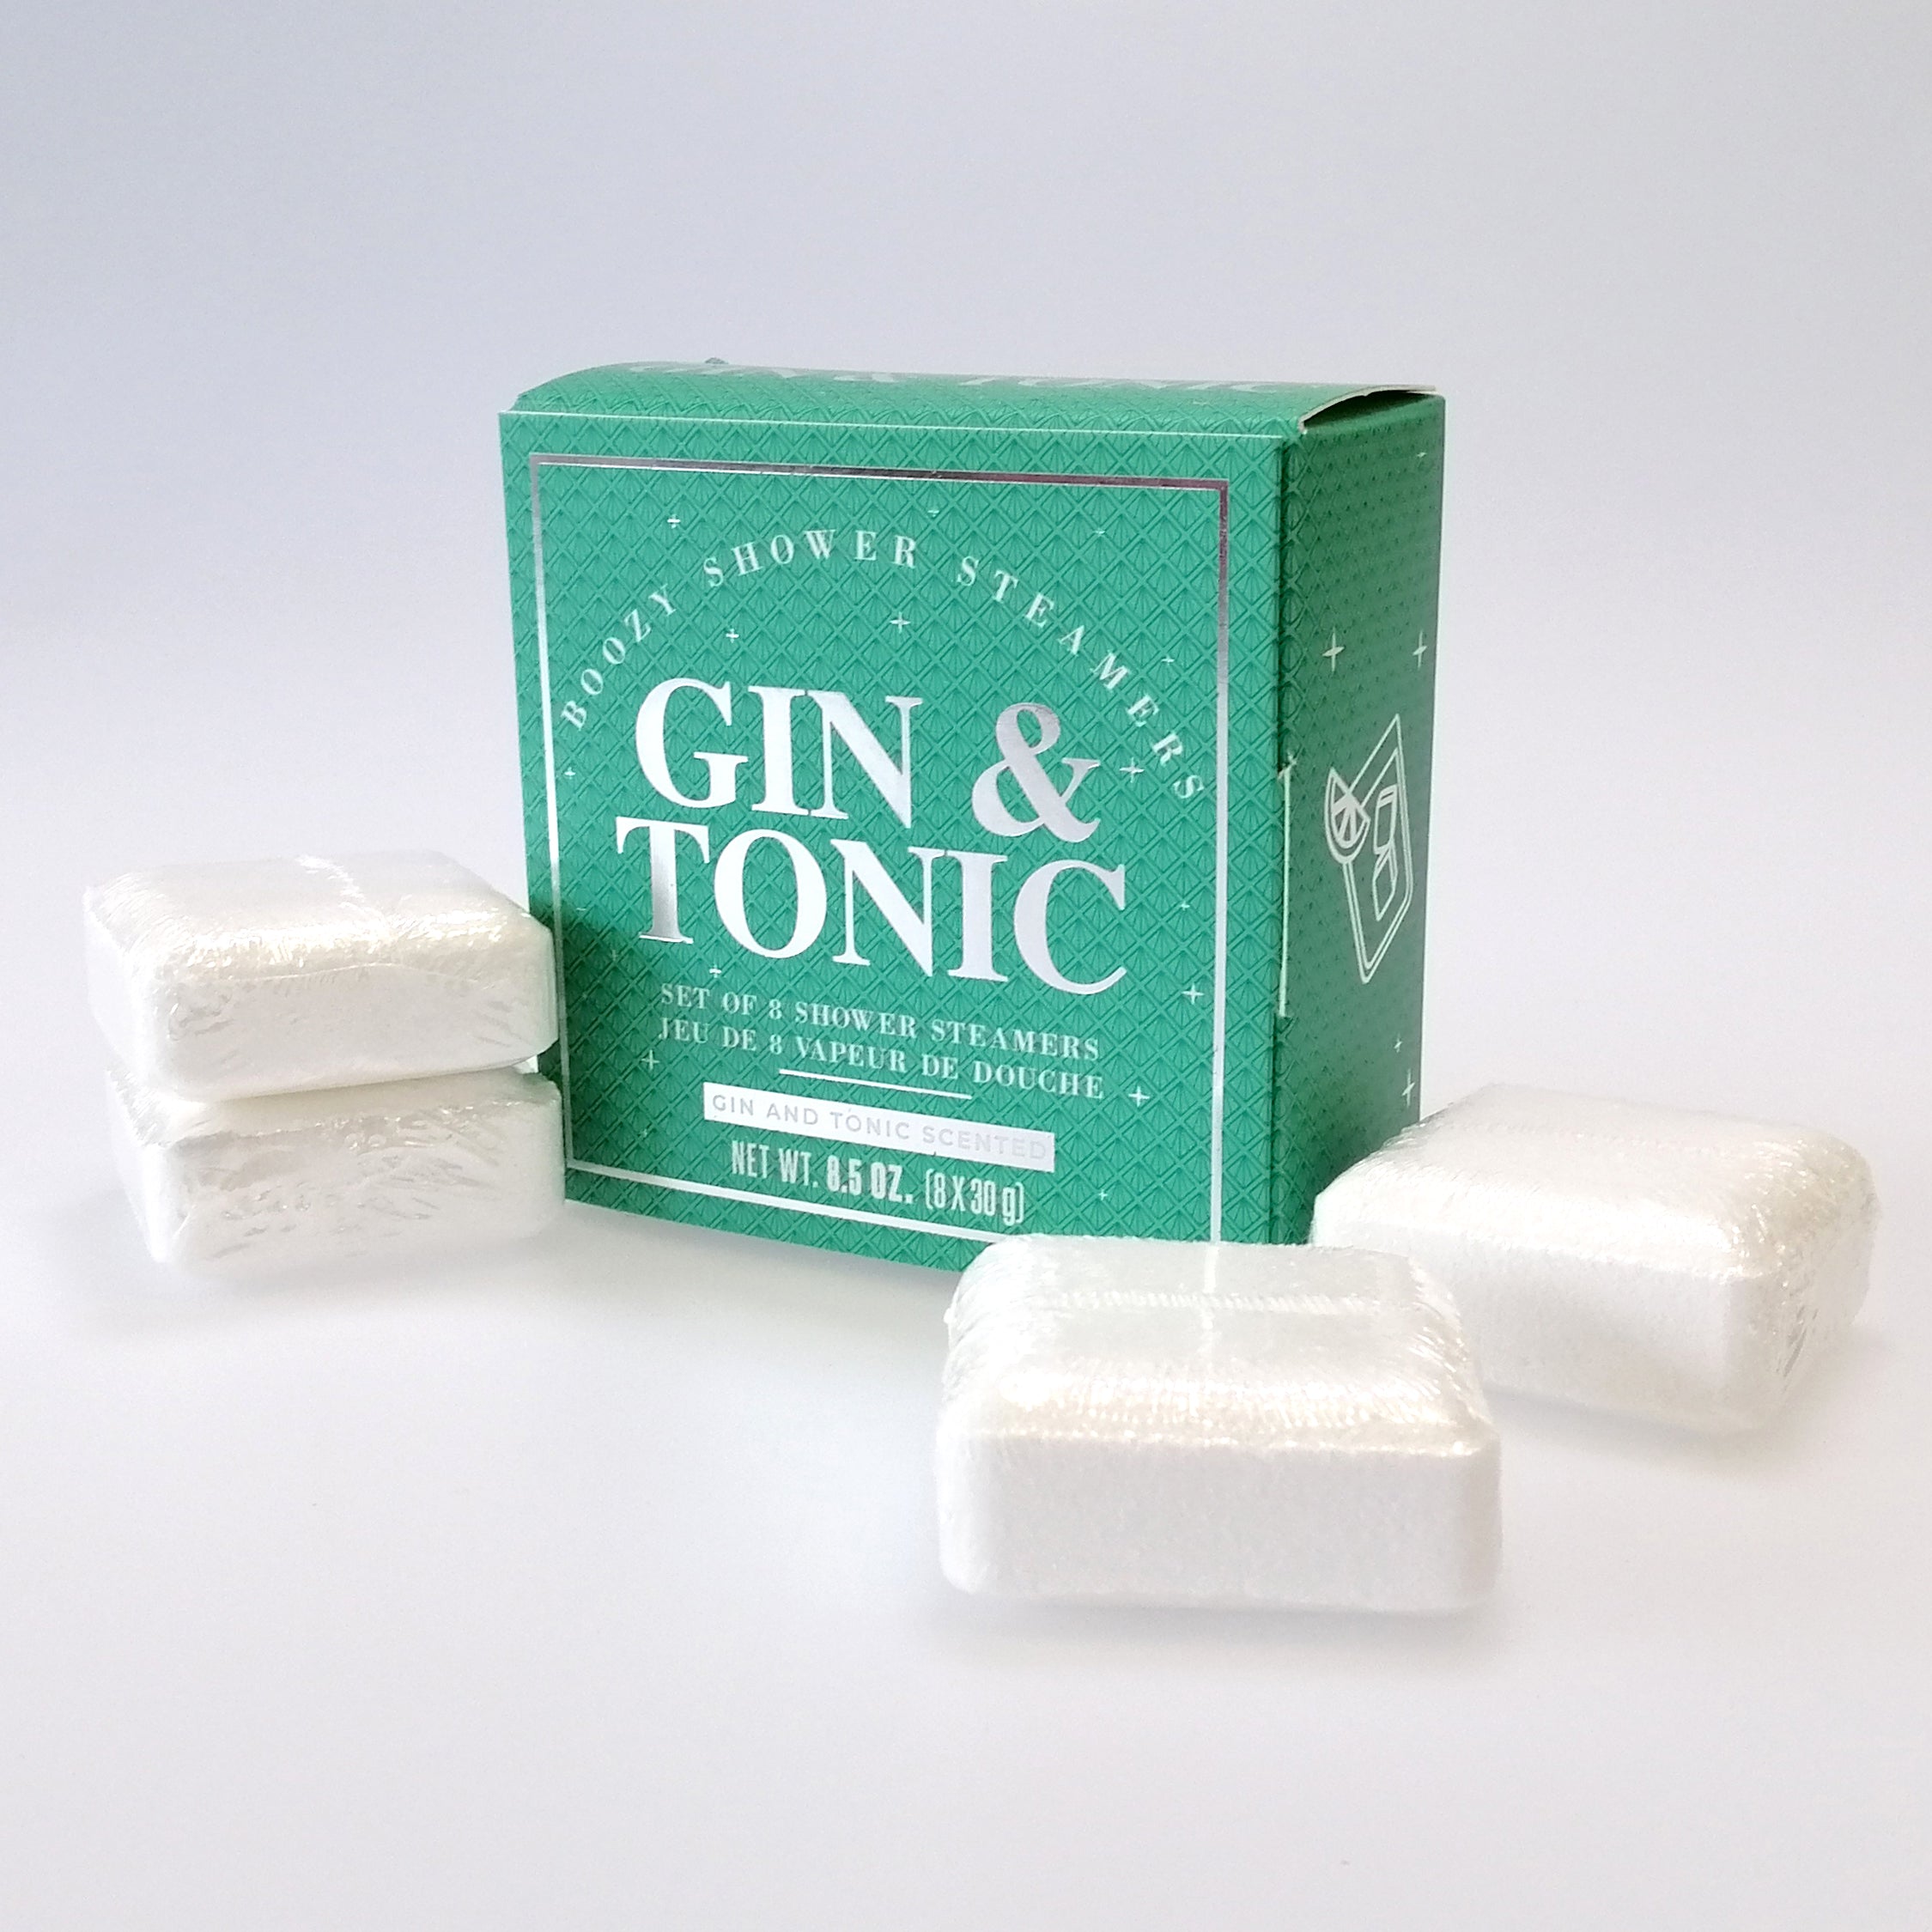 Gin & Tonic' Boozy Shower Steamers - Set of 8